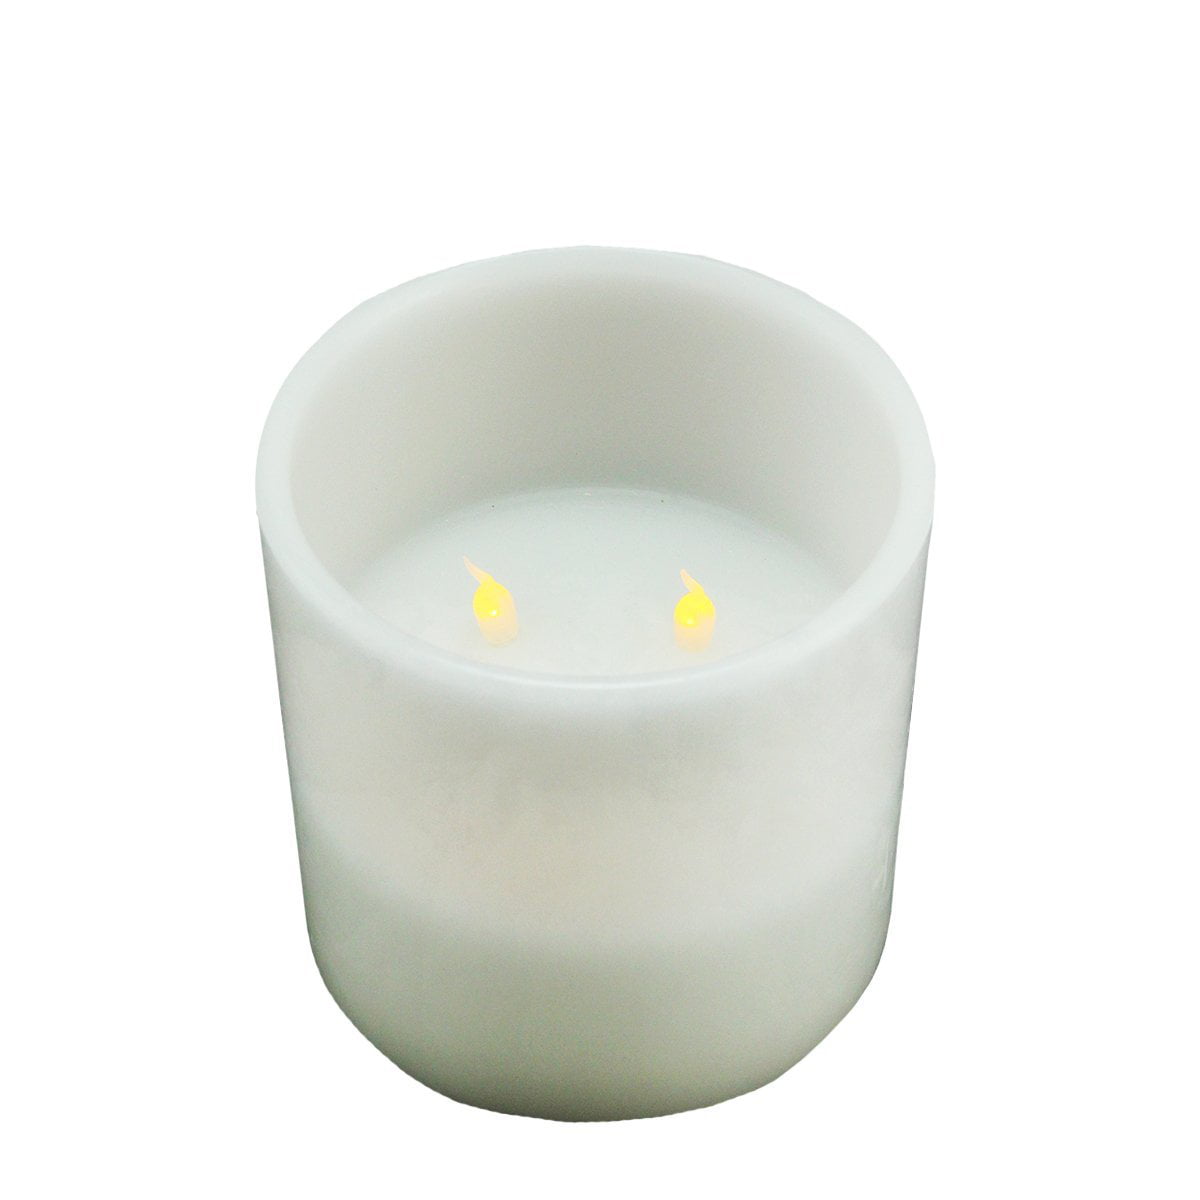 200 hour White PASSIONFRUIT Natural Fruit Scented Plant Based PILLAR CANDLE Gift 